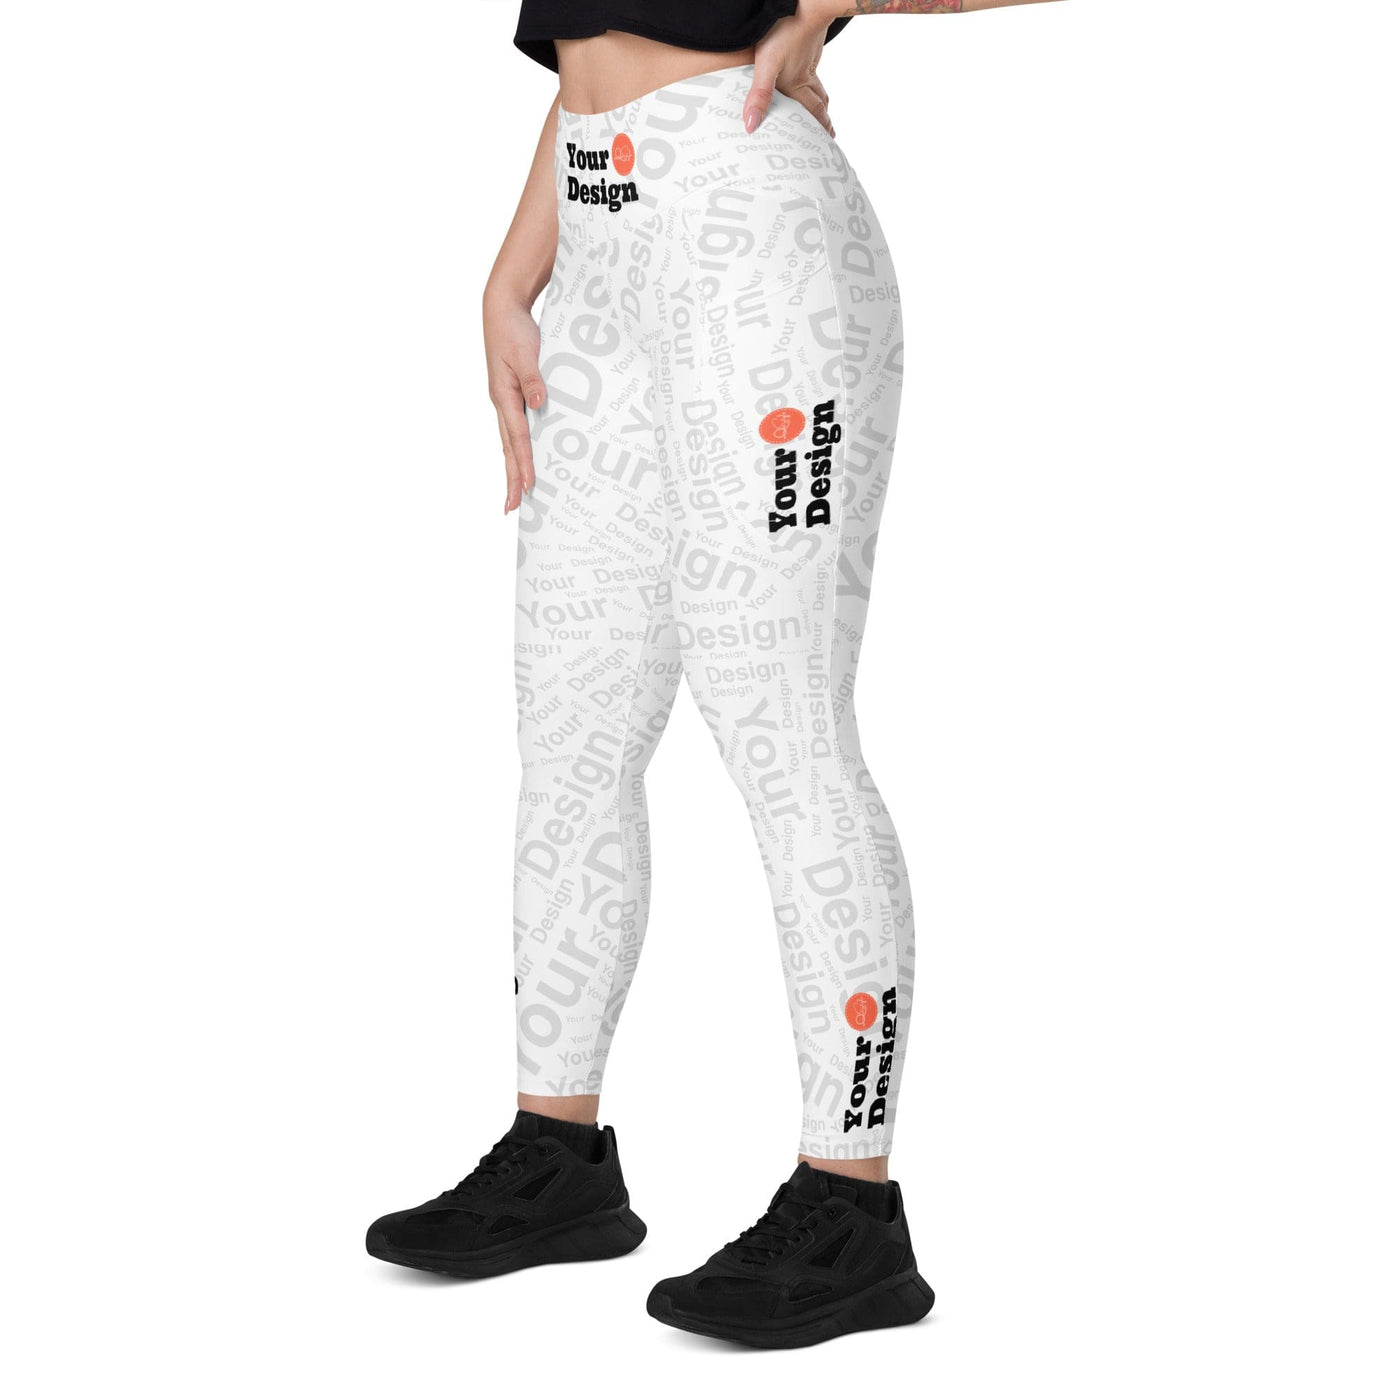 Dropship Custom Leggings With Pockets to Sell Online at a Lower Price | Doba